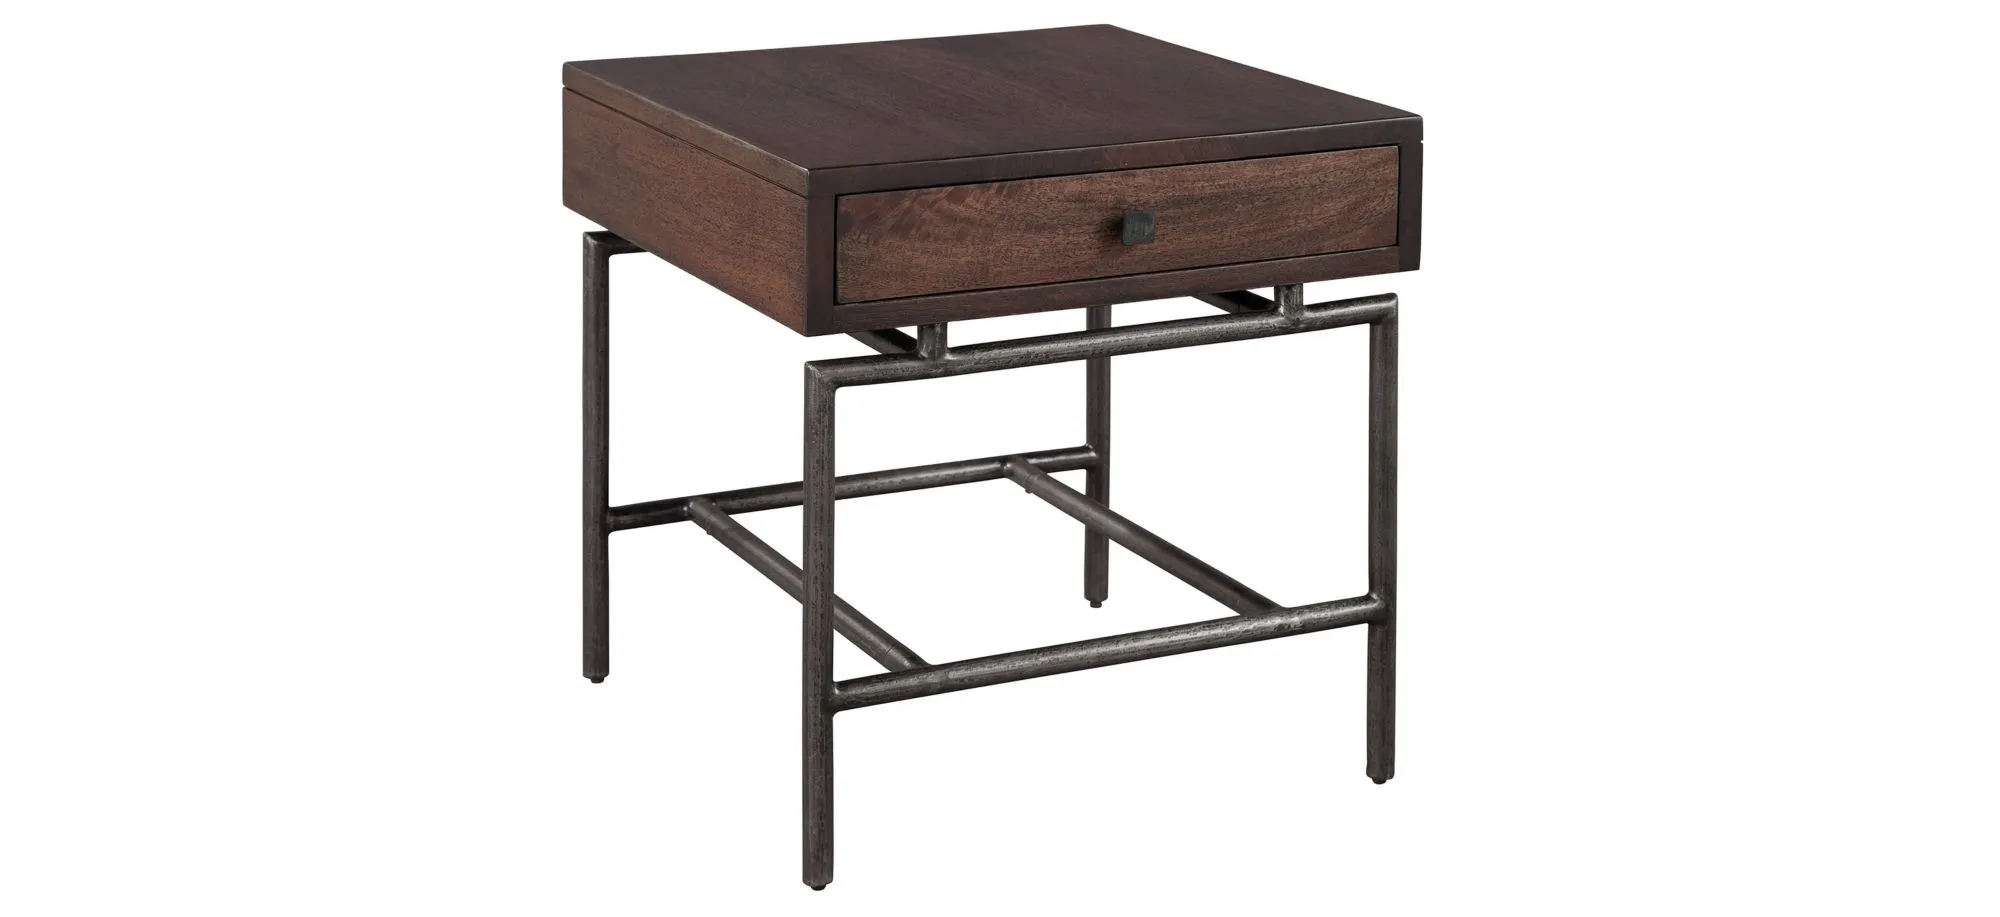 Special Reserve Accent Table in SPECIAL RESERVE by Hekman Furniture Company